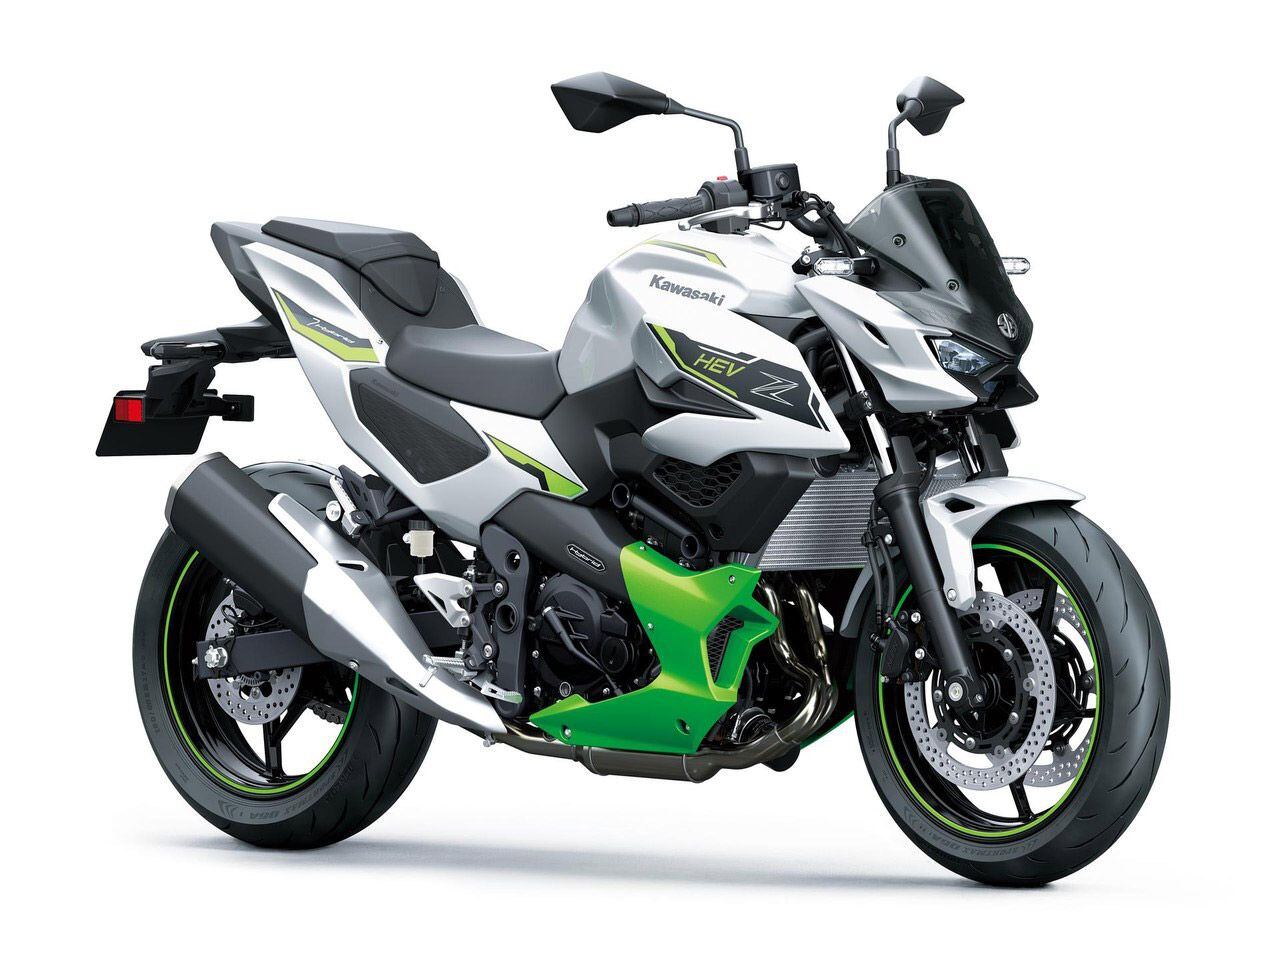 The Z7 Hybrid uses the same powertrain and chassis as the Ninja 7.